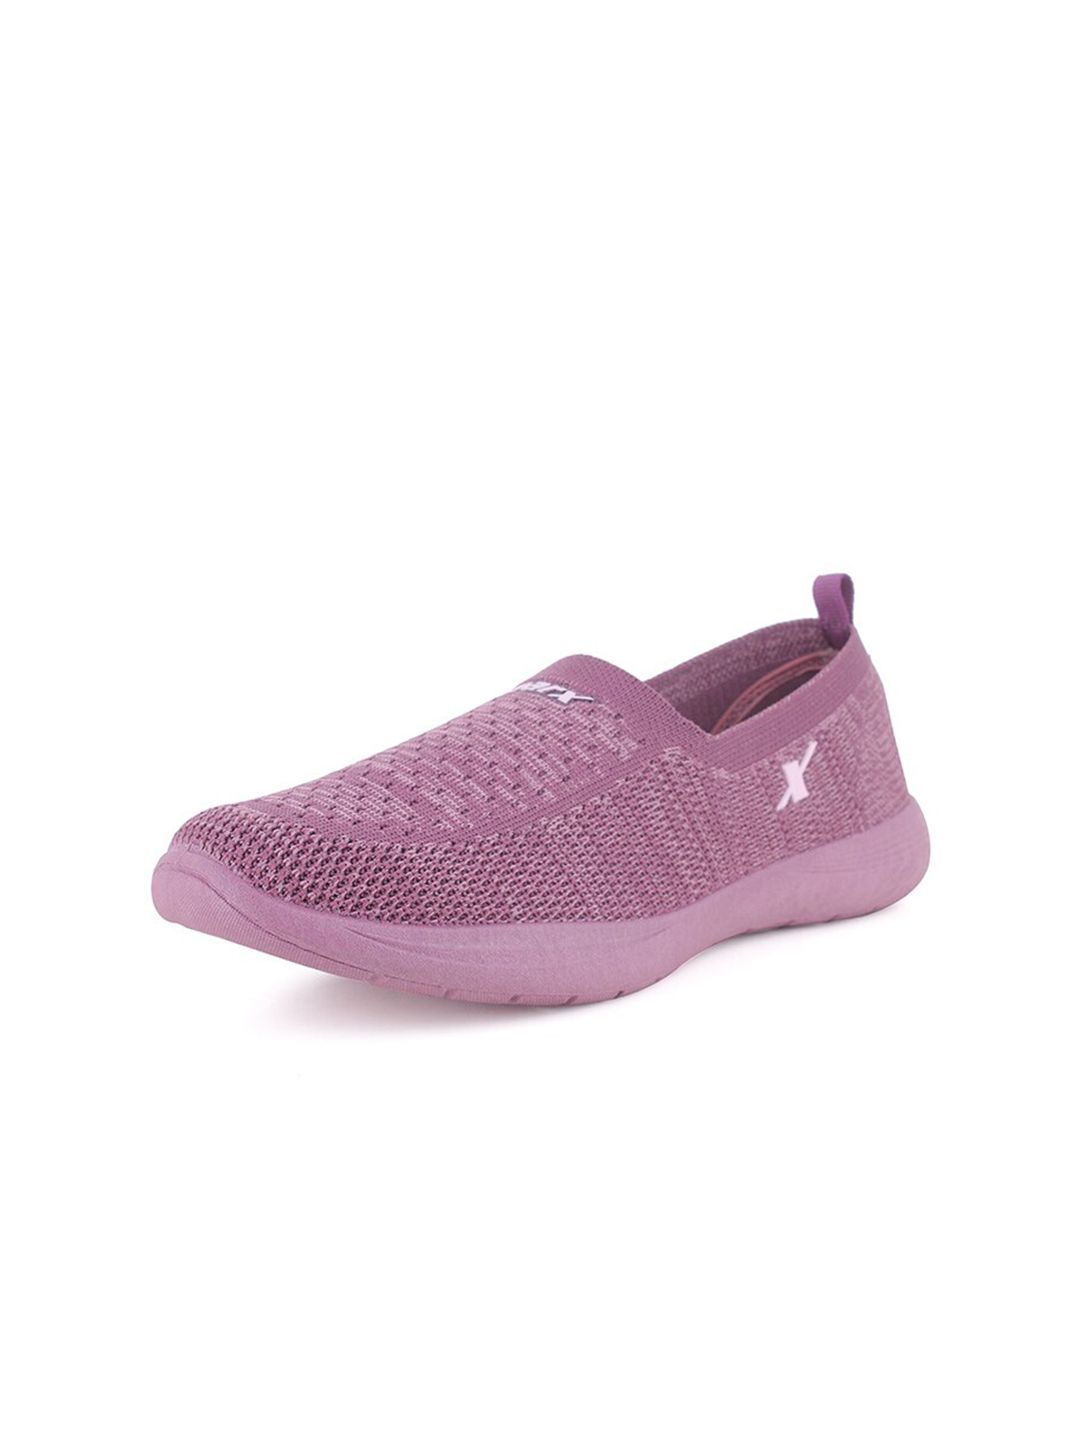 Sparx Women Purple Textile Running Non-Marking Shoes Price in India